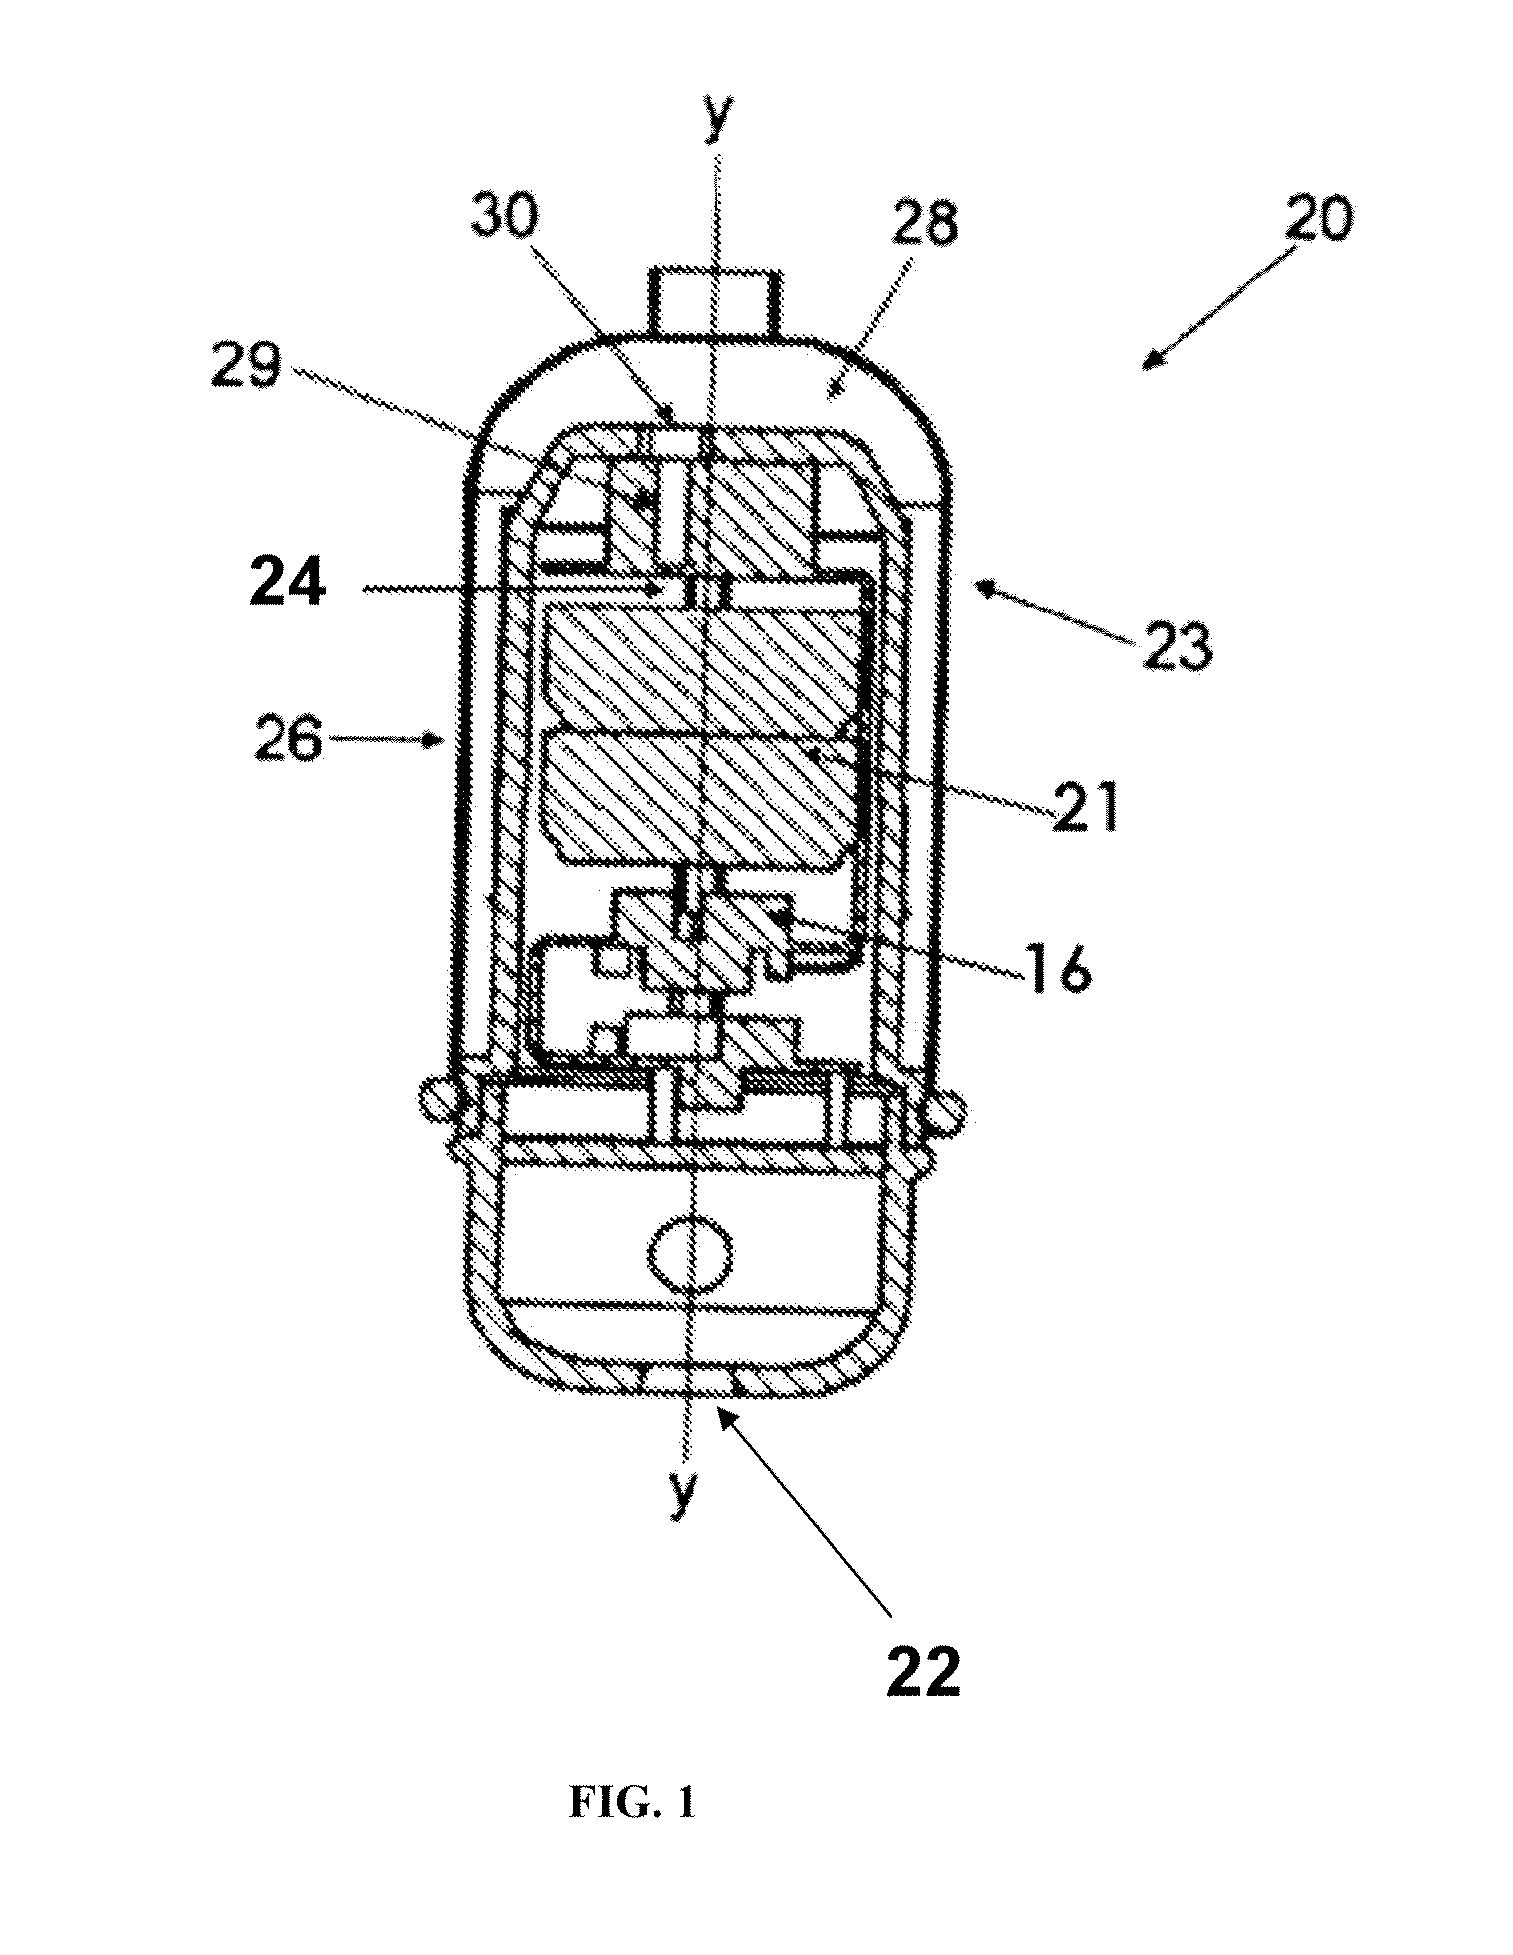 Method of evaluating constipation using an ingestible capsule